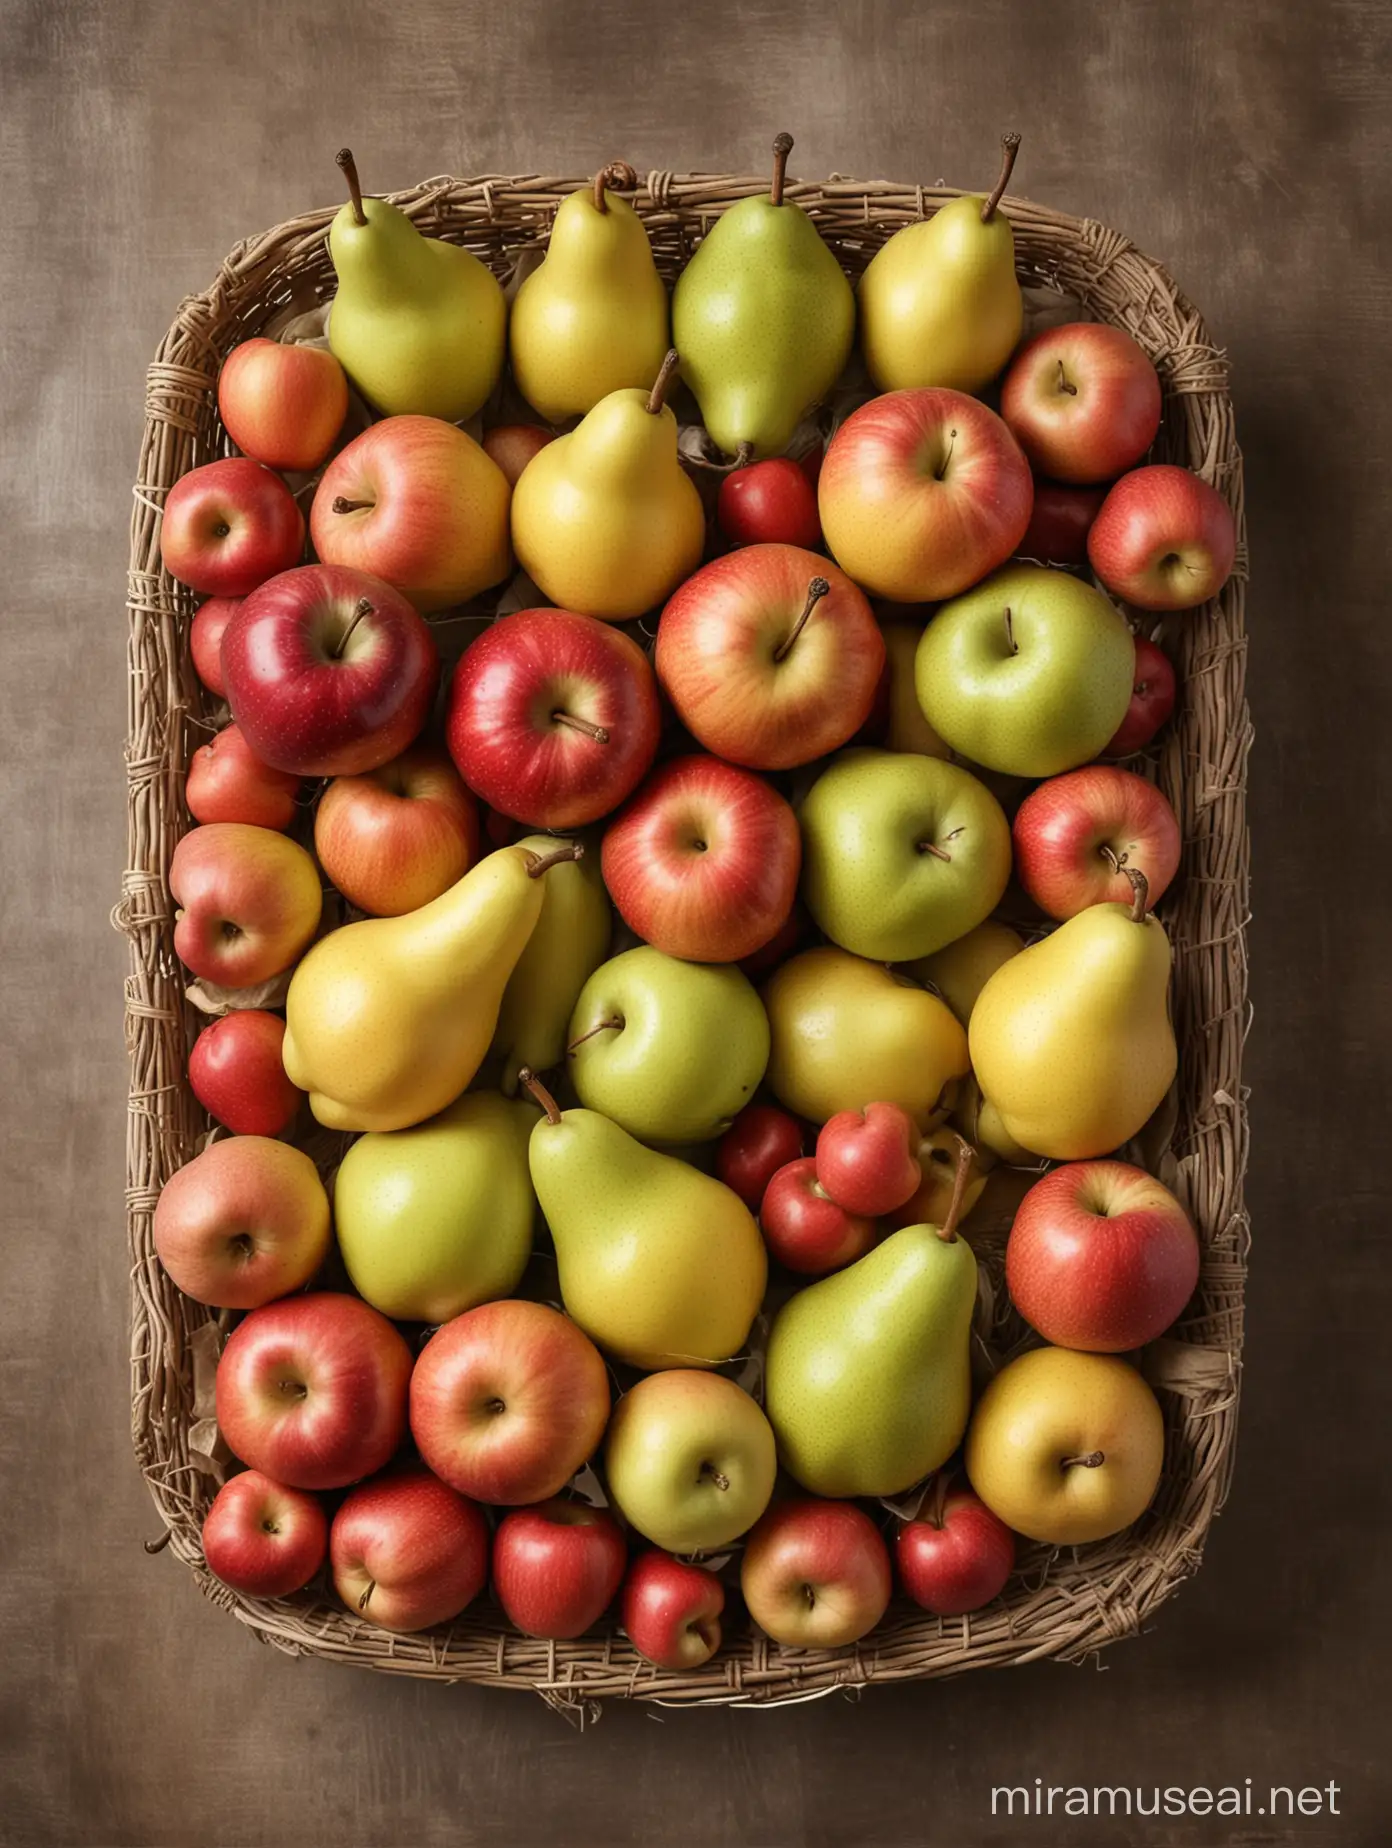 Fresh Pears and Apples Arrangement in Naturalistic Composition